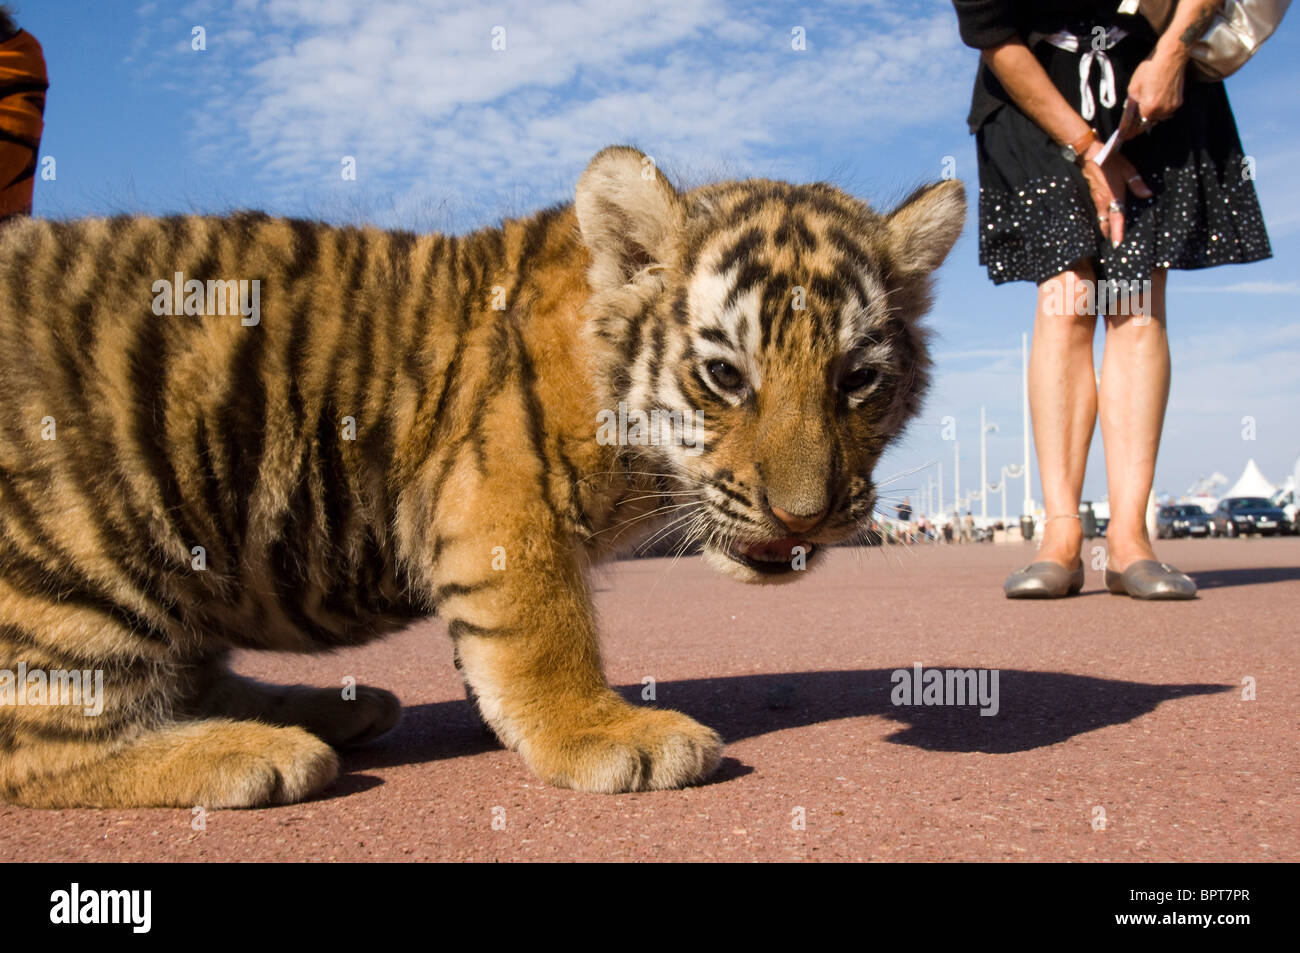 A tiger cub from a circus on a street in Dieppe France Stock Photo